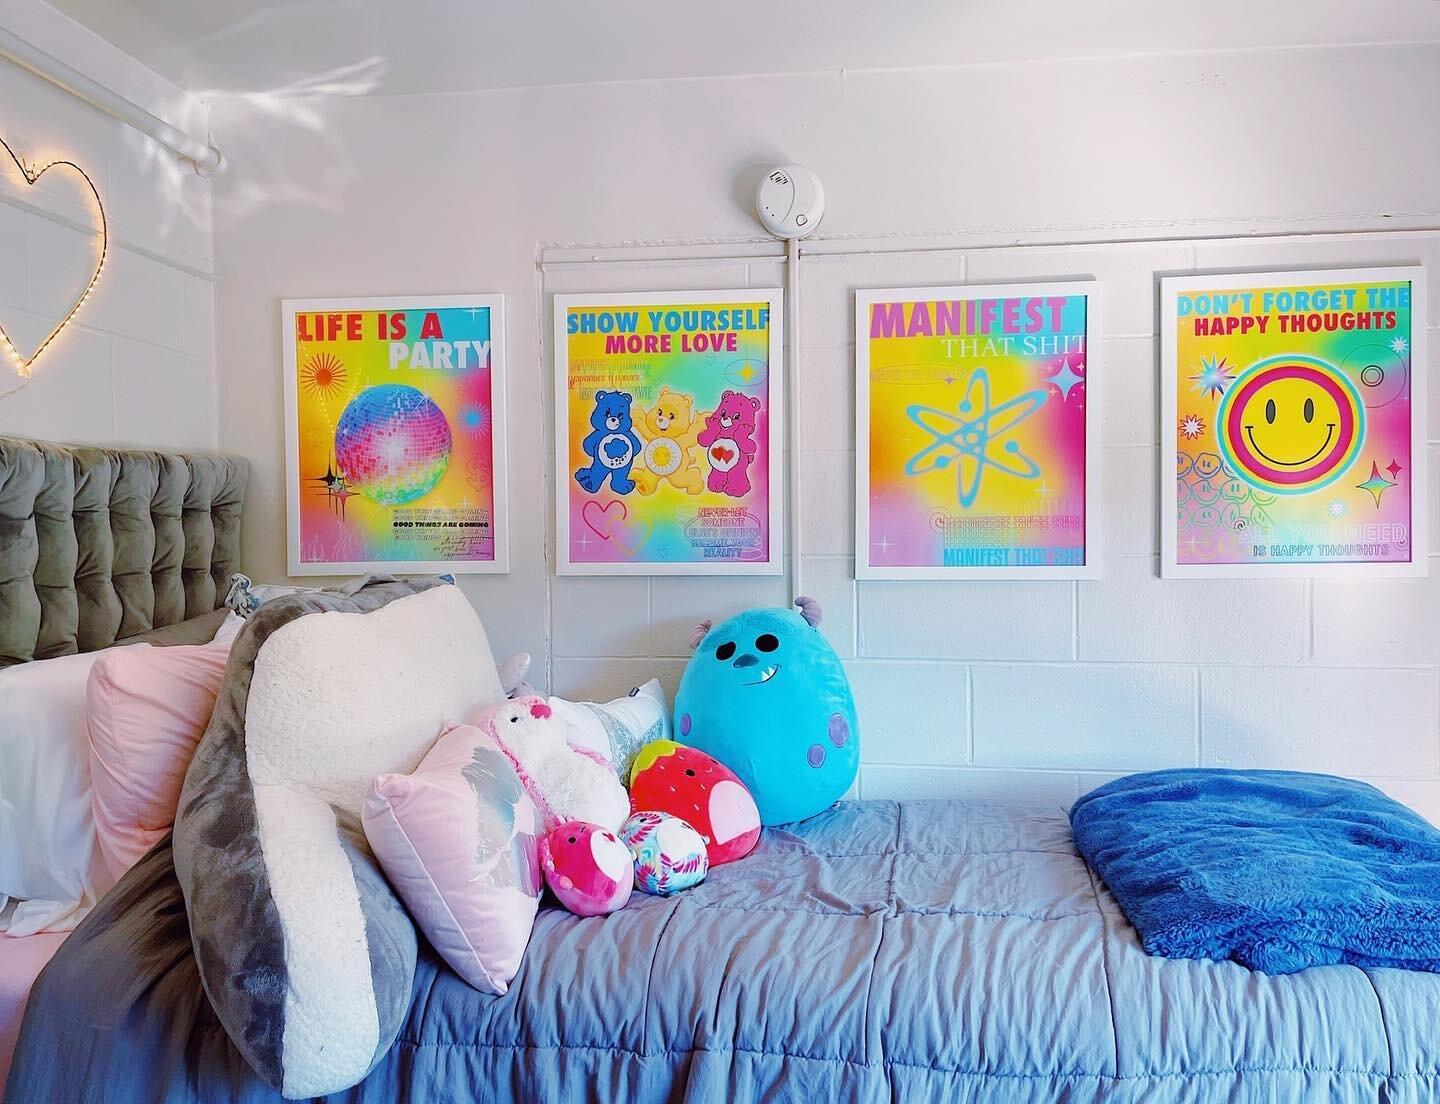 4x the best selling creativejawns prints 🤝🏼 the sickest room in the game 🌈🪩❤️&zwj;🔥

Link in bio to shop the best selling &ldquo;assouline print&rdquo; collection from my redbubble shop. 10+ prints available in this collection 👏🏼

MESSAGE / DM